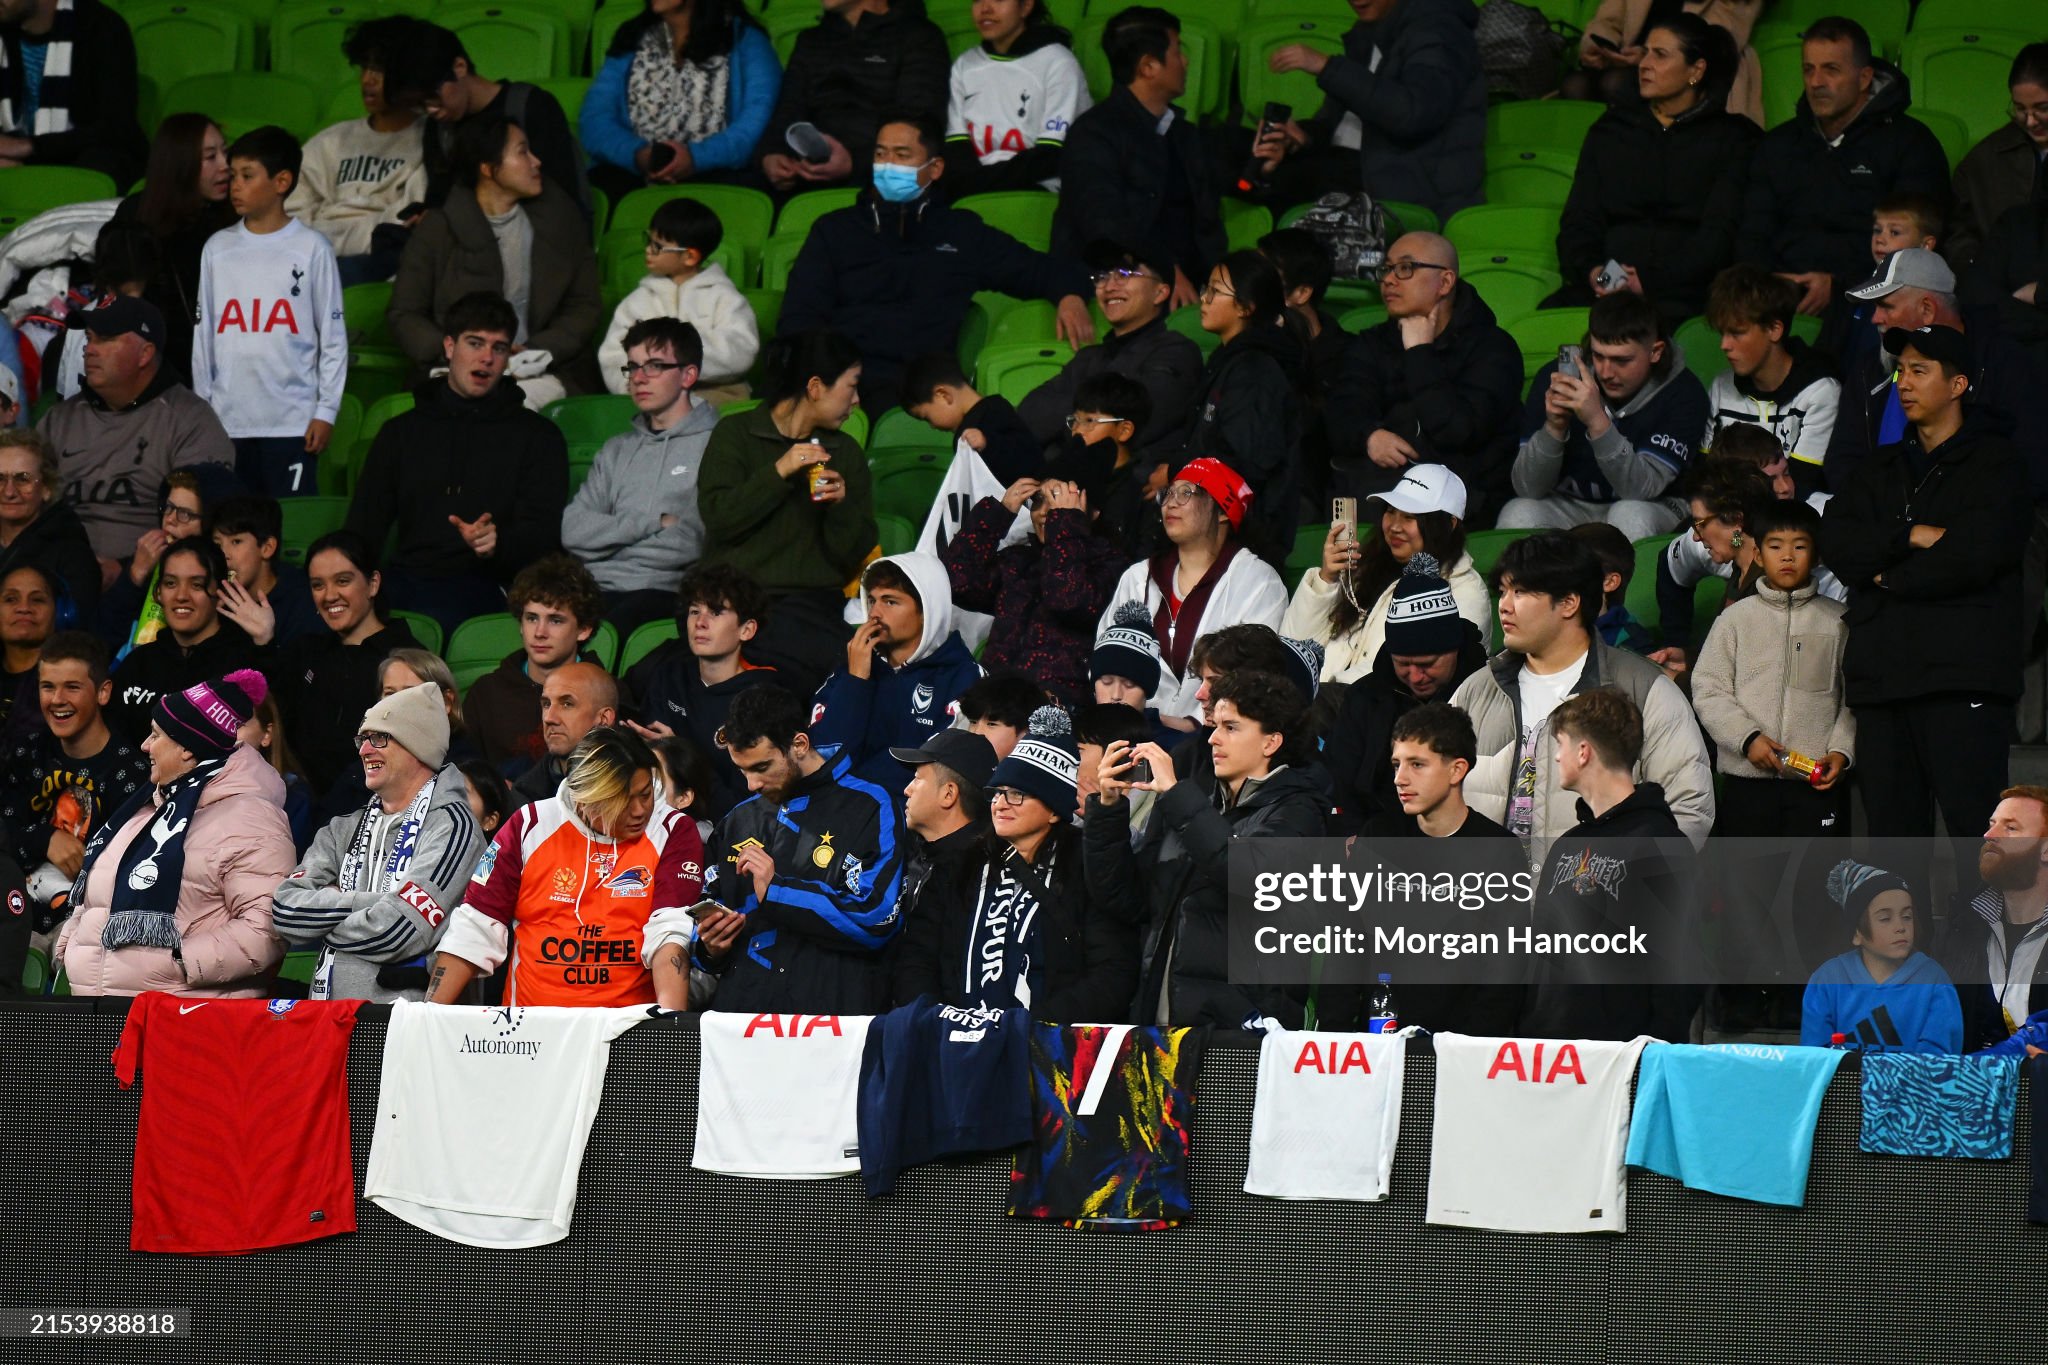 gettyimages-2153938818-2048x2048.jpg